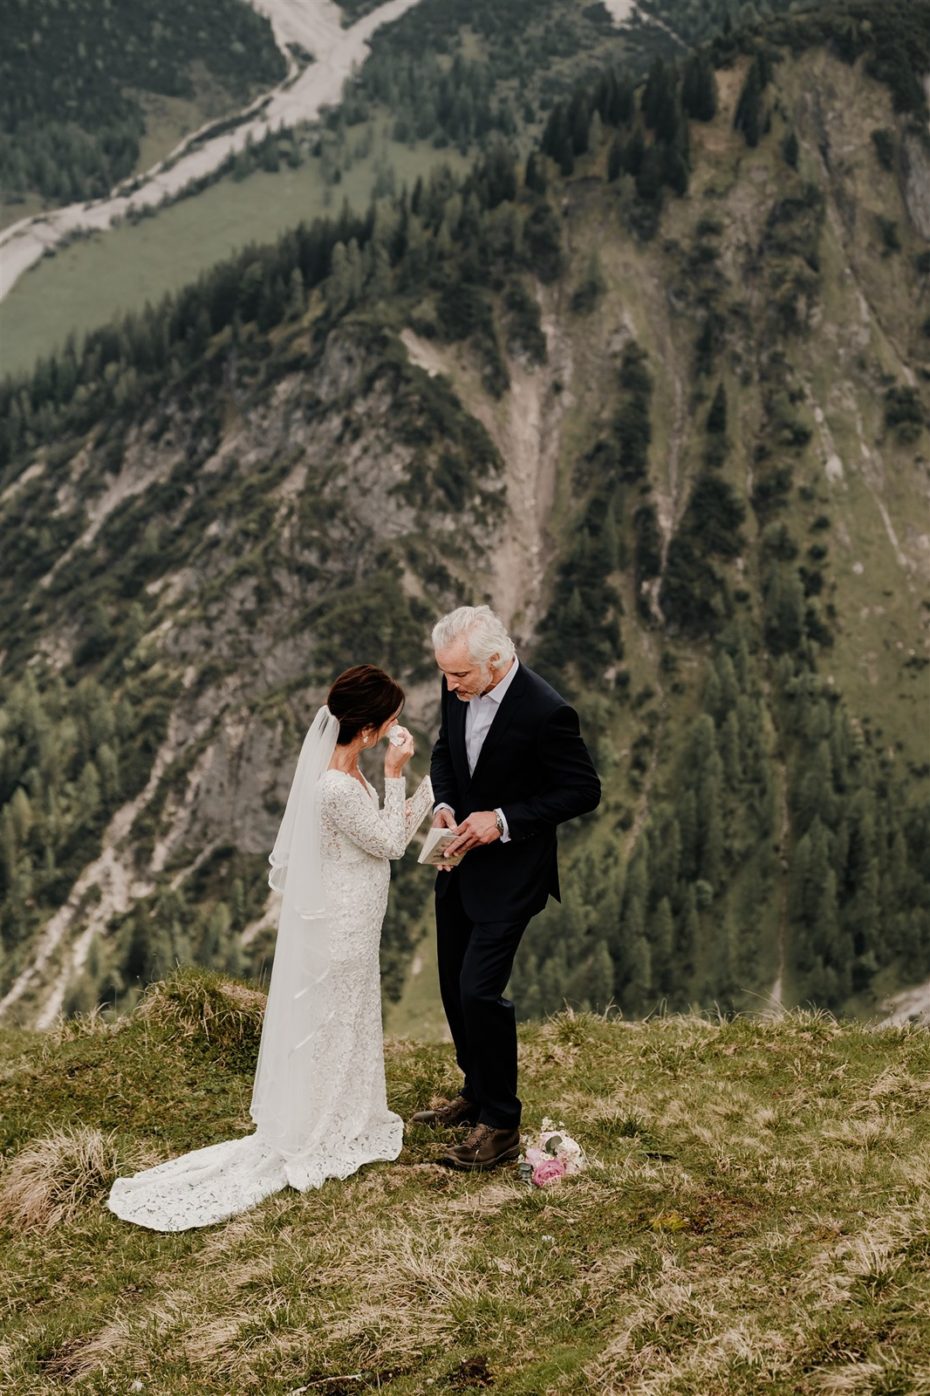 Bride wipes a tear from her face as groom reads wedding vows on top of a mountain in Seefeld